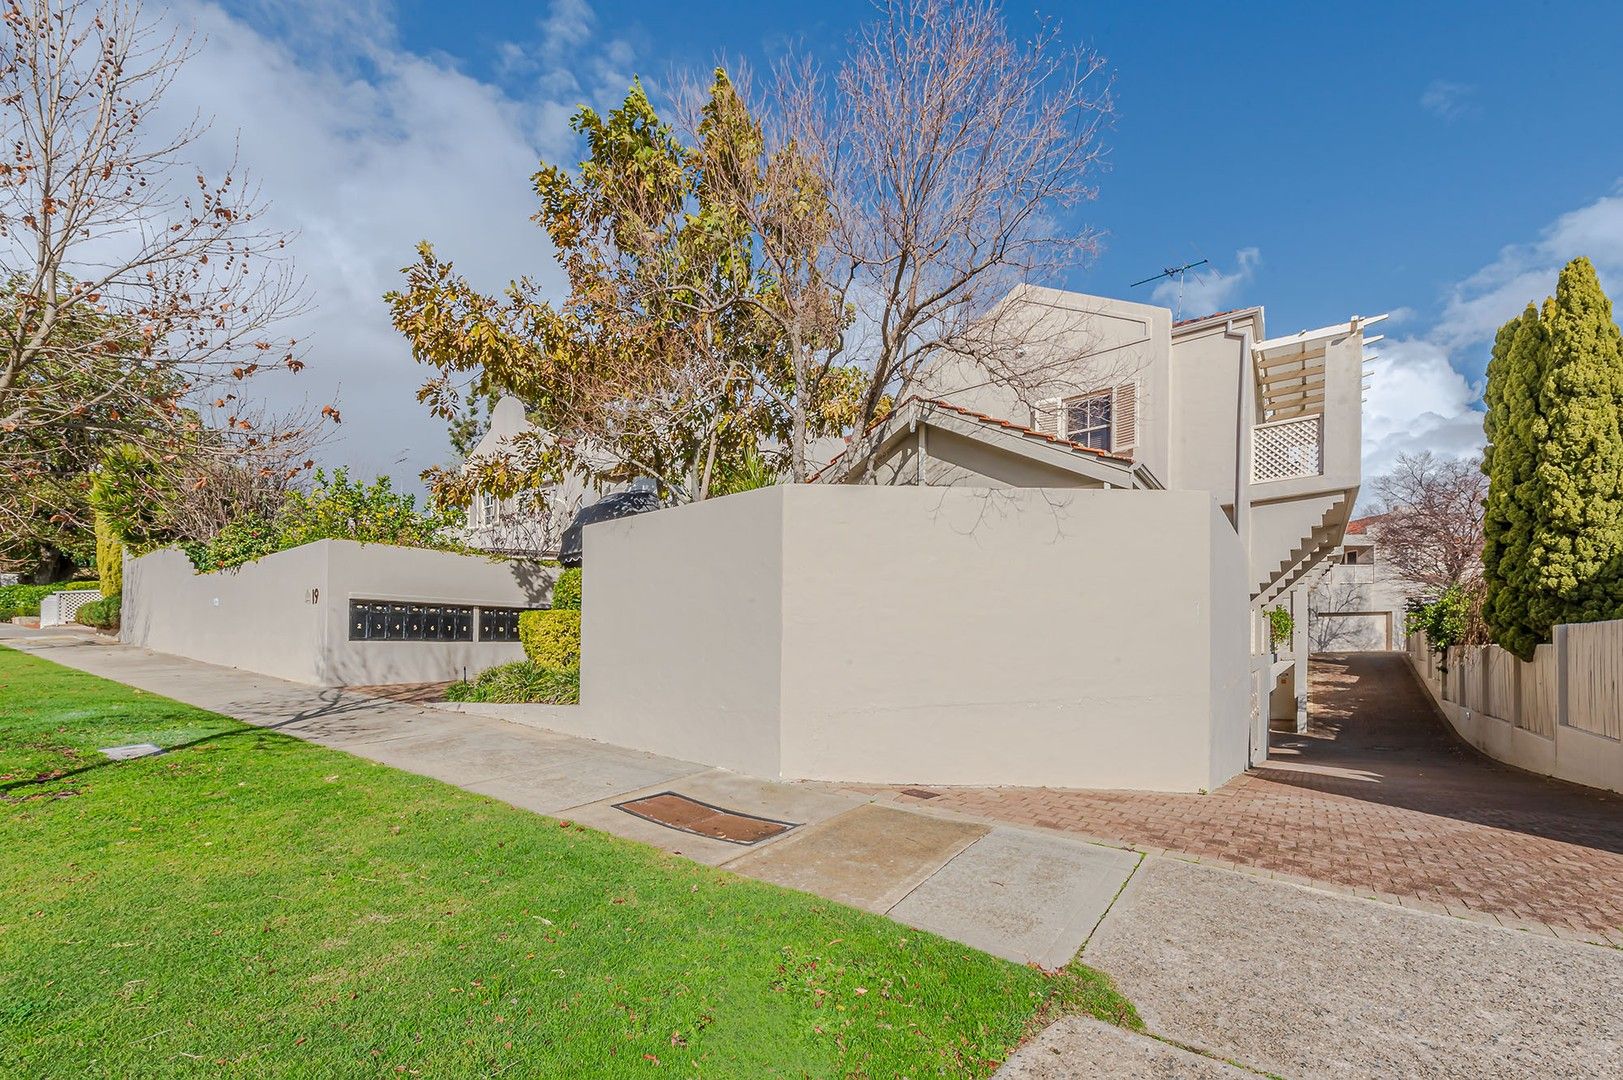 3 bedrooms Townhouse in 11/19 Karoo Street SOUTH PERTH WA, 6151